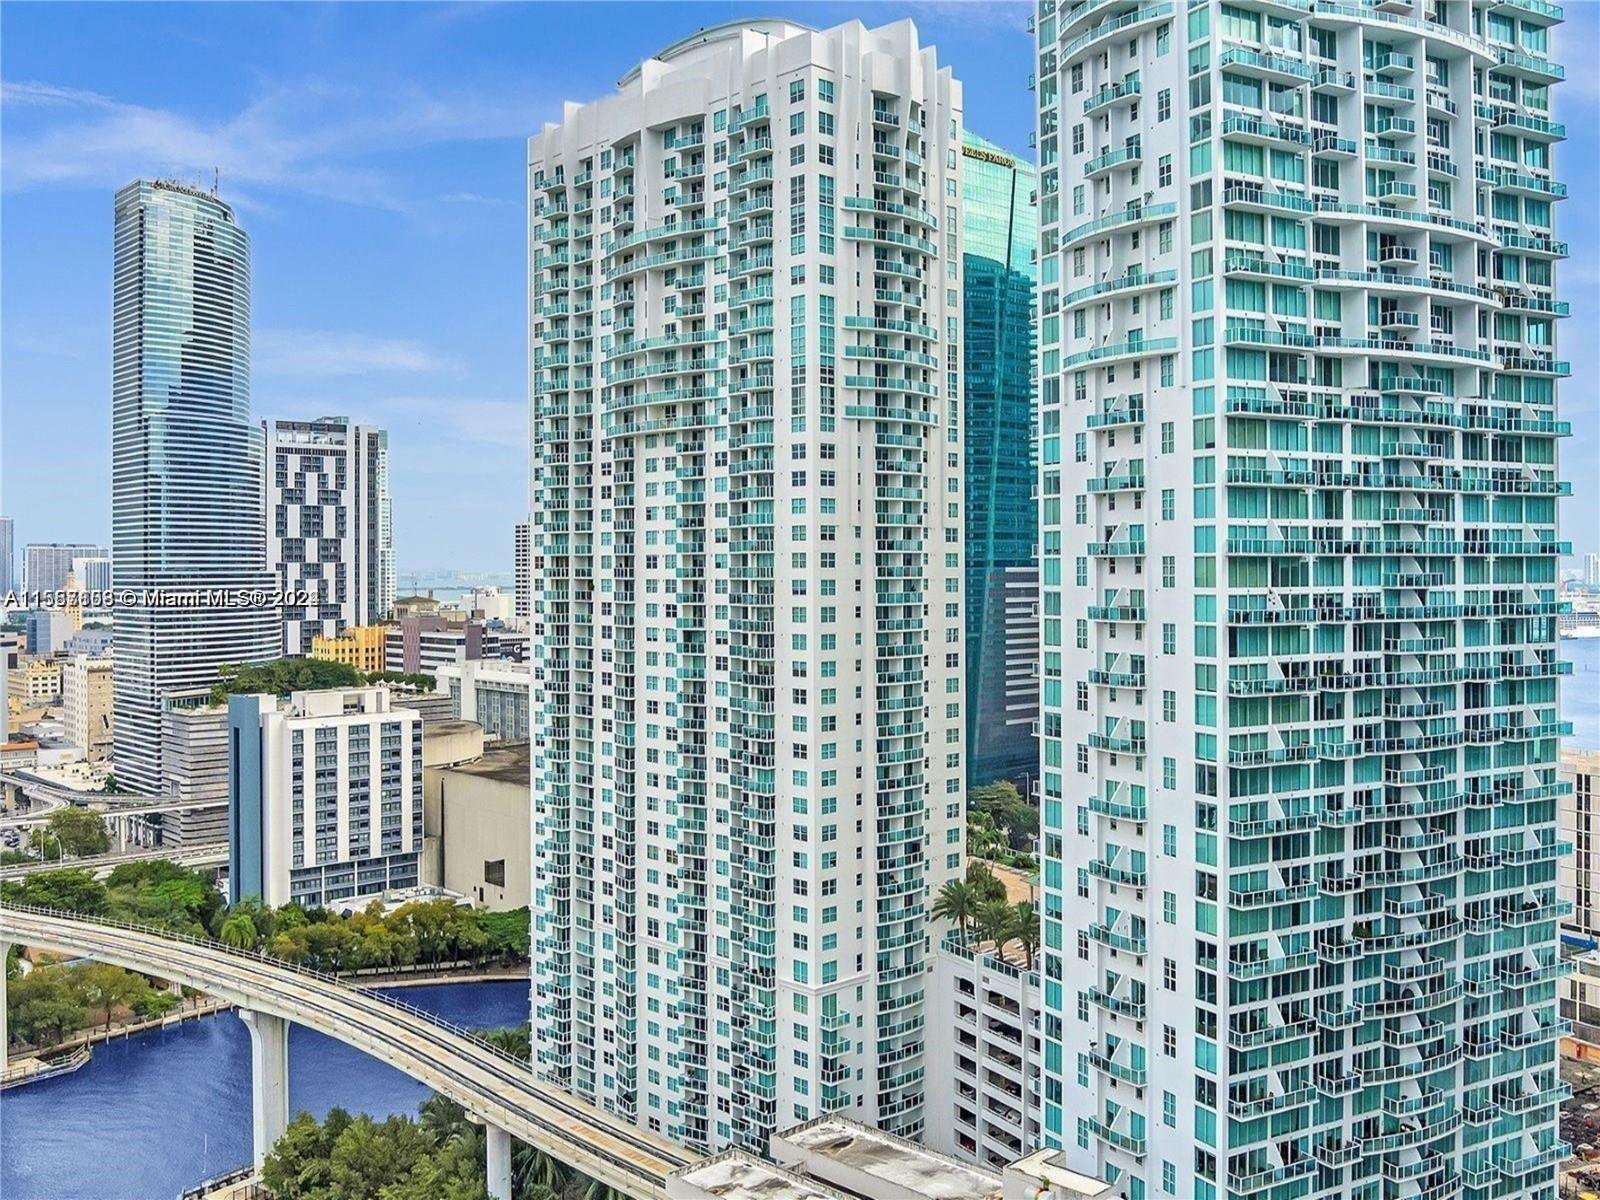 East view of the Miami River and Miami Bay. Experience the pinnacle of urban living in this 25th-floor condominium nestled in the vibrant heart of Brickell, Miami. Beyond its charm and cozy interior and breathtaking panoramic views, this condo boasts an unbeatable location. It's just a leisurely stroll away from the world-renowned Brickell City Centre Mall and 100 yards from the 5th Street Station Metro mover stop providing easy access to the entire city. AMAZING UNIT with granite countertops, stainless steel appliances, European-style cabinetry, and marble flooring. 5 LEVEL FITNESS CENTER, POOLS , 24 HR CONCIERGE, BUSINESS CENTER, FITNESS, MEN & WOMEN SPA, SAUNA, STEAM ROOM, GOURMET RESTAURANT EL CIELO.*** Tenant in place until March 1/2025 at $4200/month***